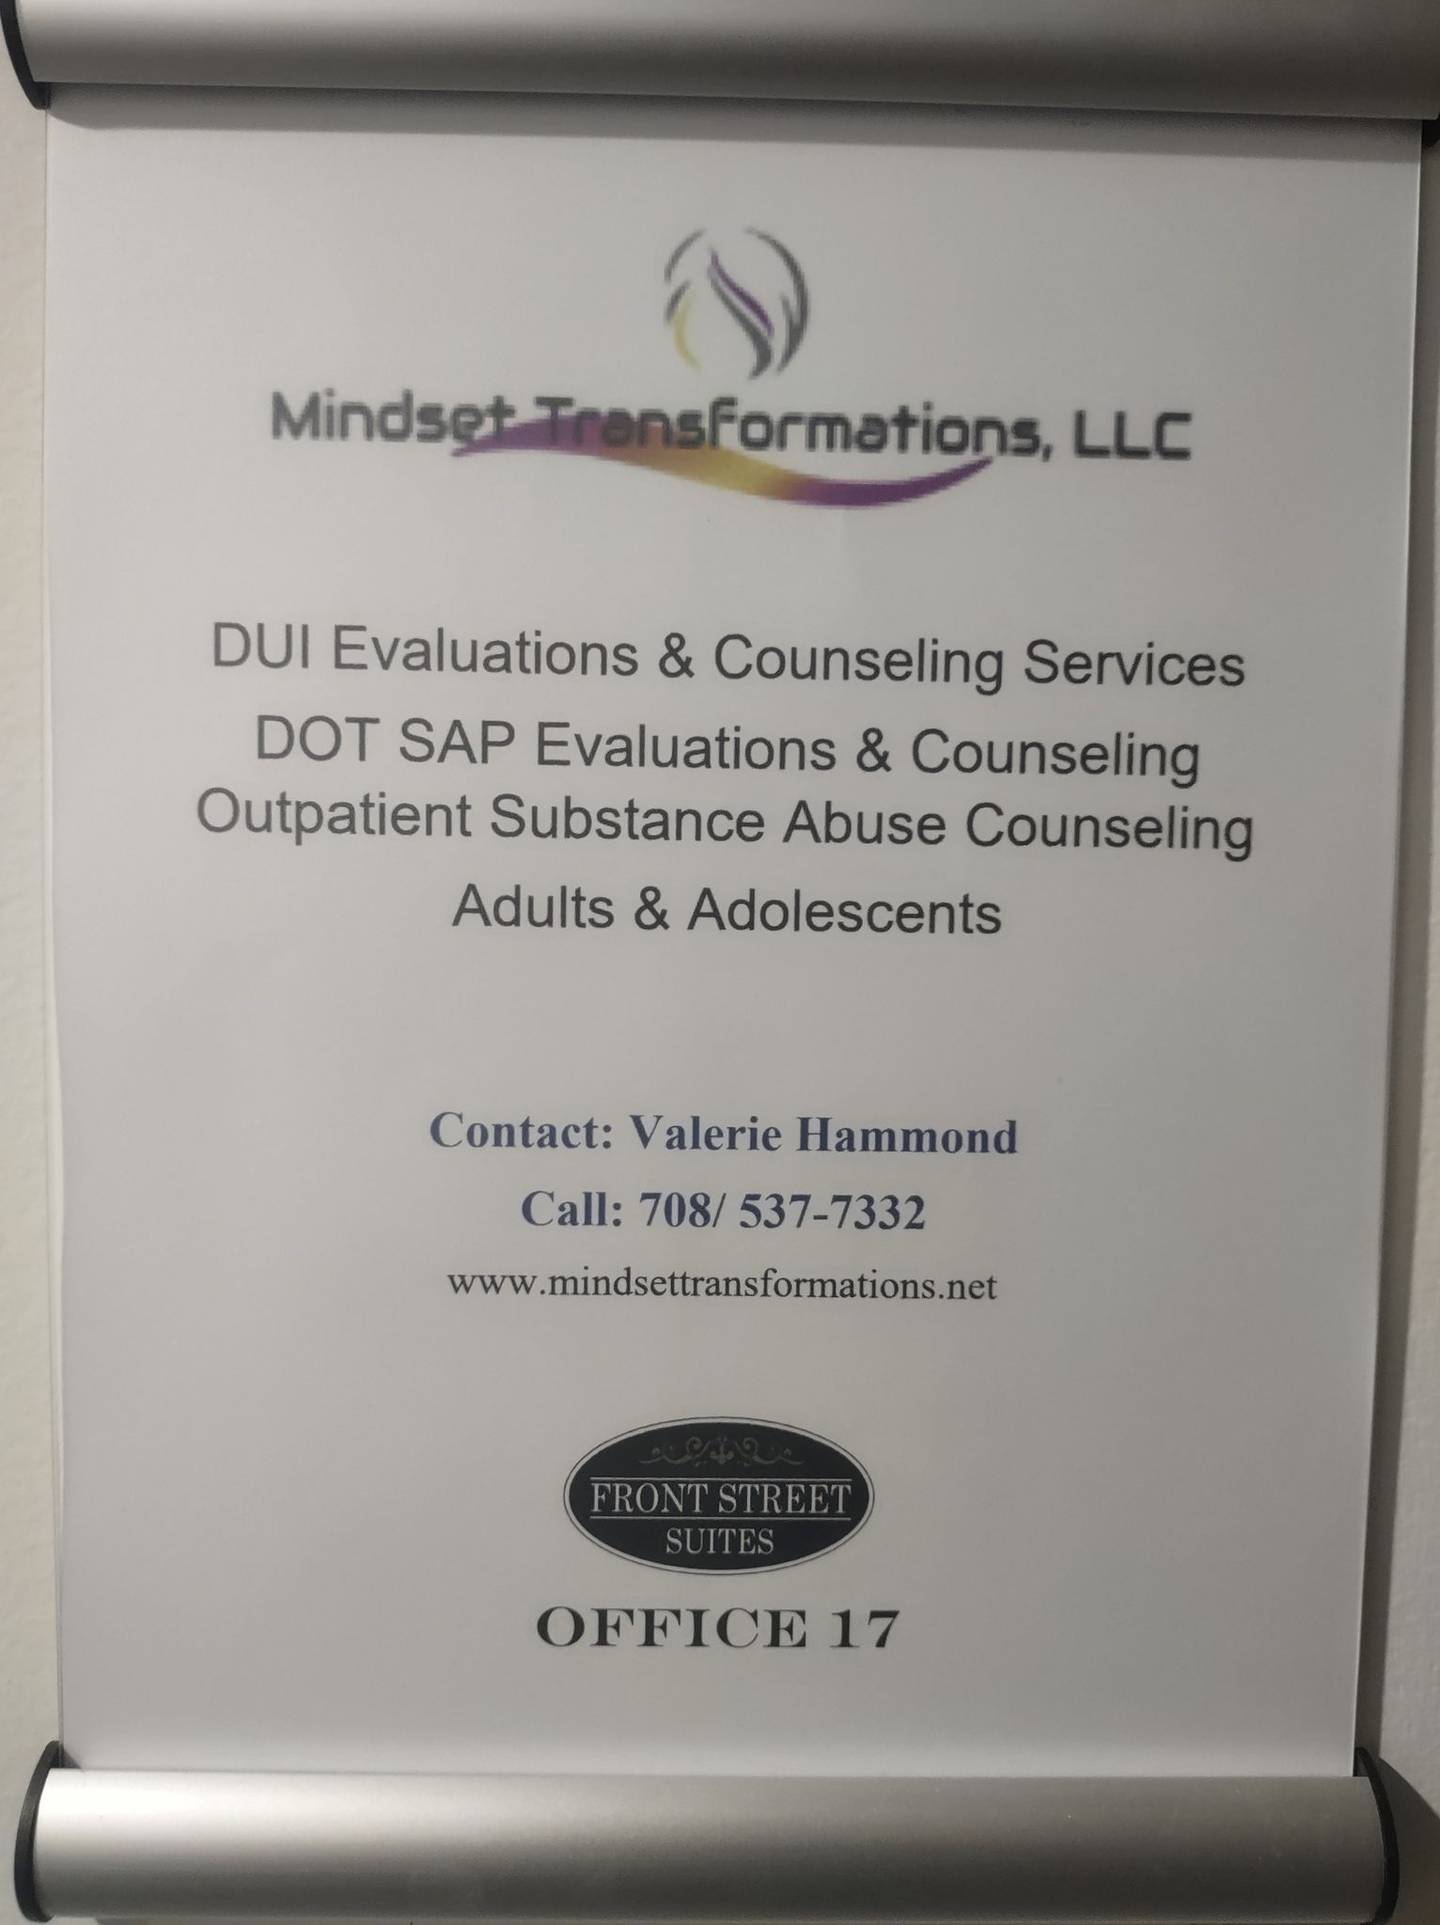 Mindset Transformations is licensed by the state of Illinois to offer outpatient substance abuse treatment, DUI evaluations and DOT SAP evaluations. Mindset Transformations offers a holistic approach to treatment, using Western and Eastern practices.